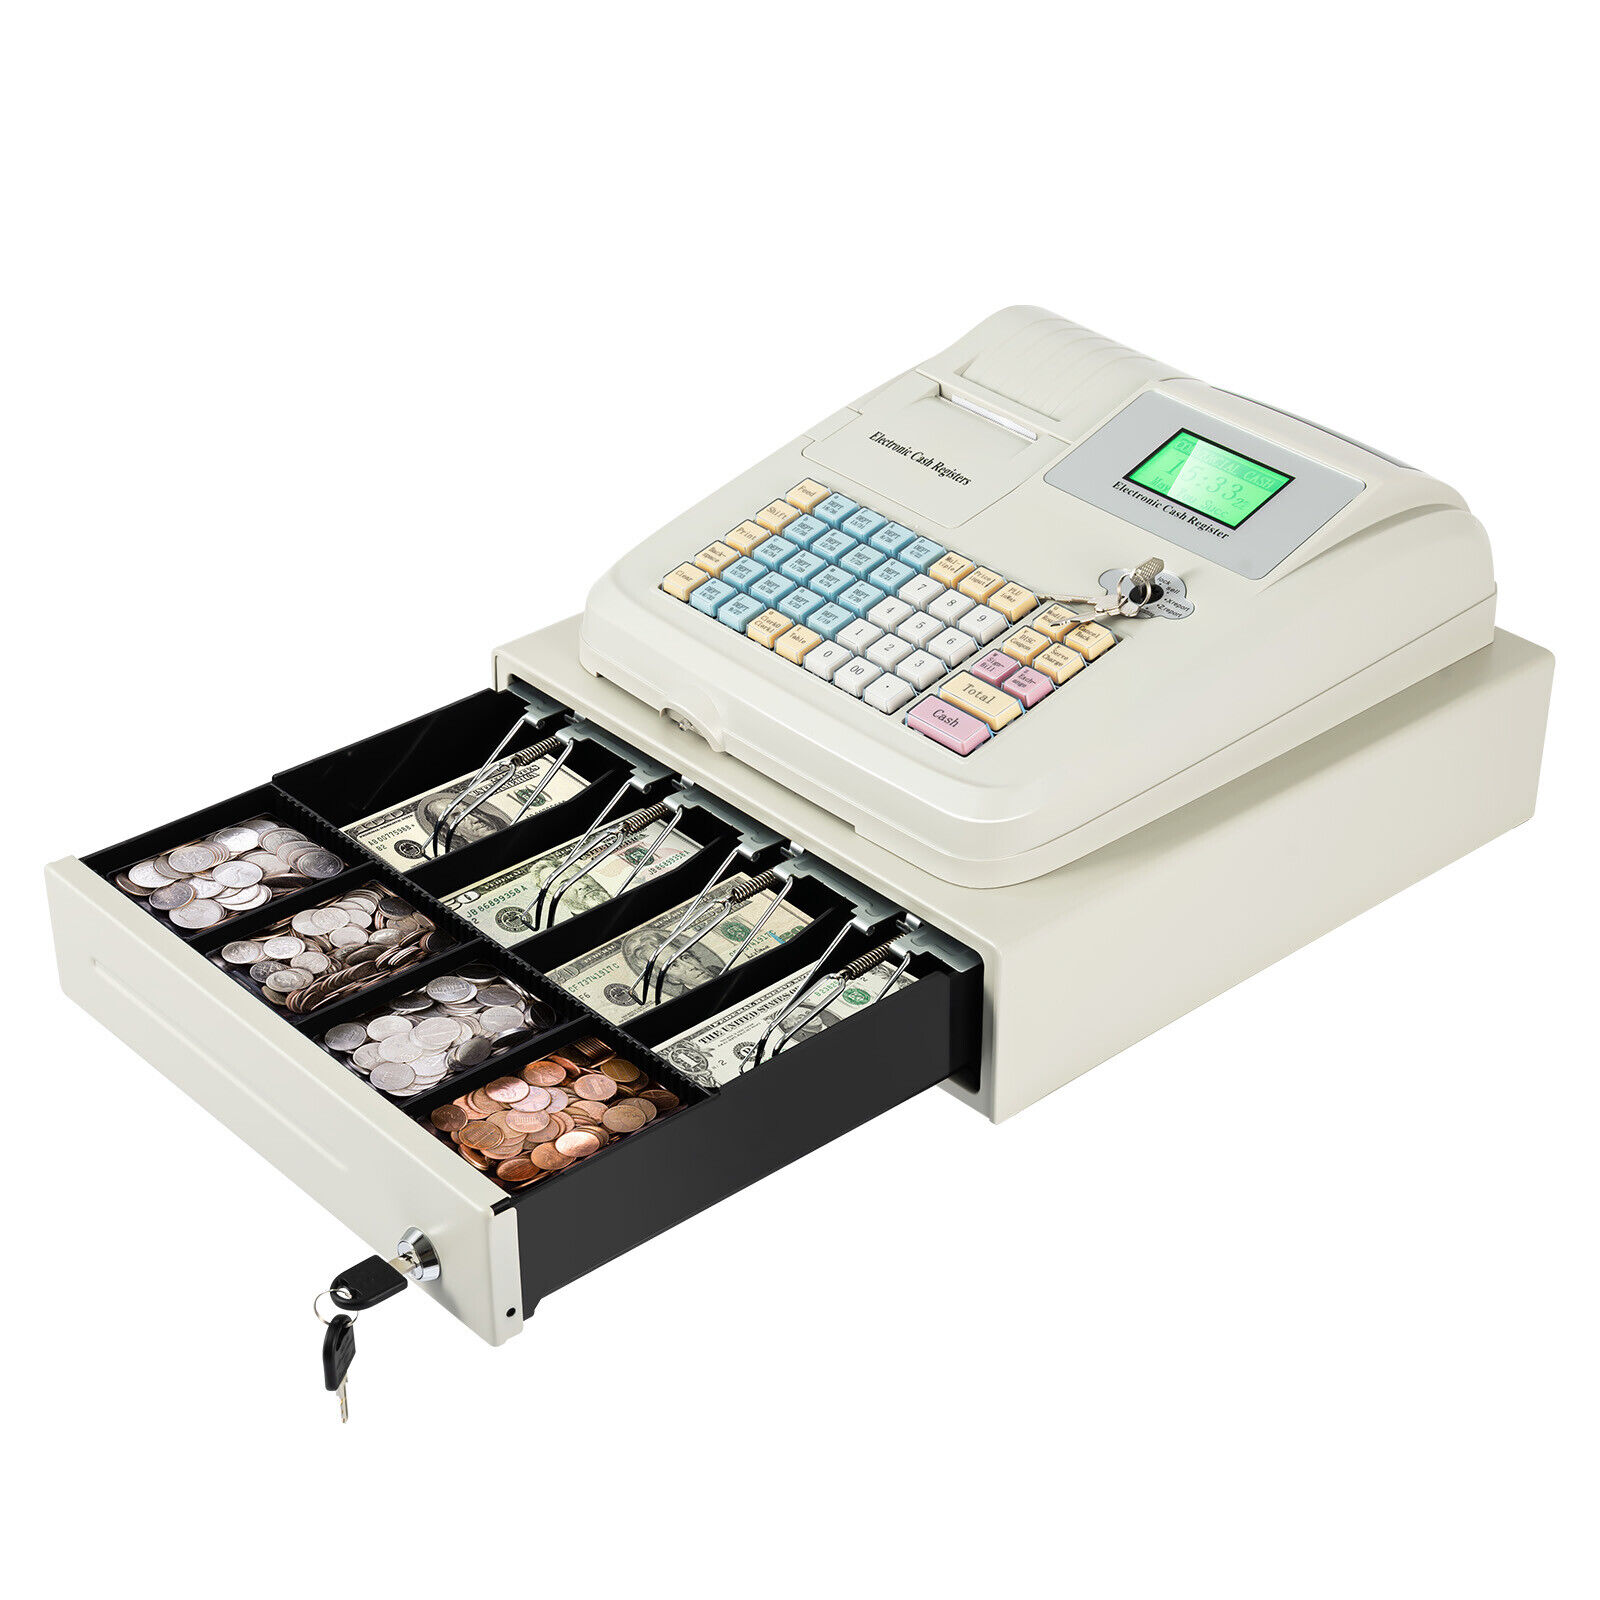 New Digital LED Cash Register with Drawer 48 Keys for Retail Restaurant POS SALE TBvechi Does Not Apply - фотография #6